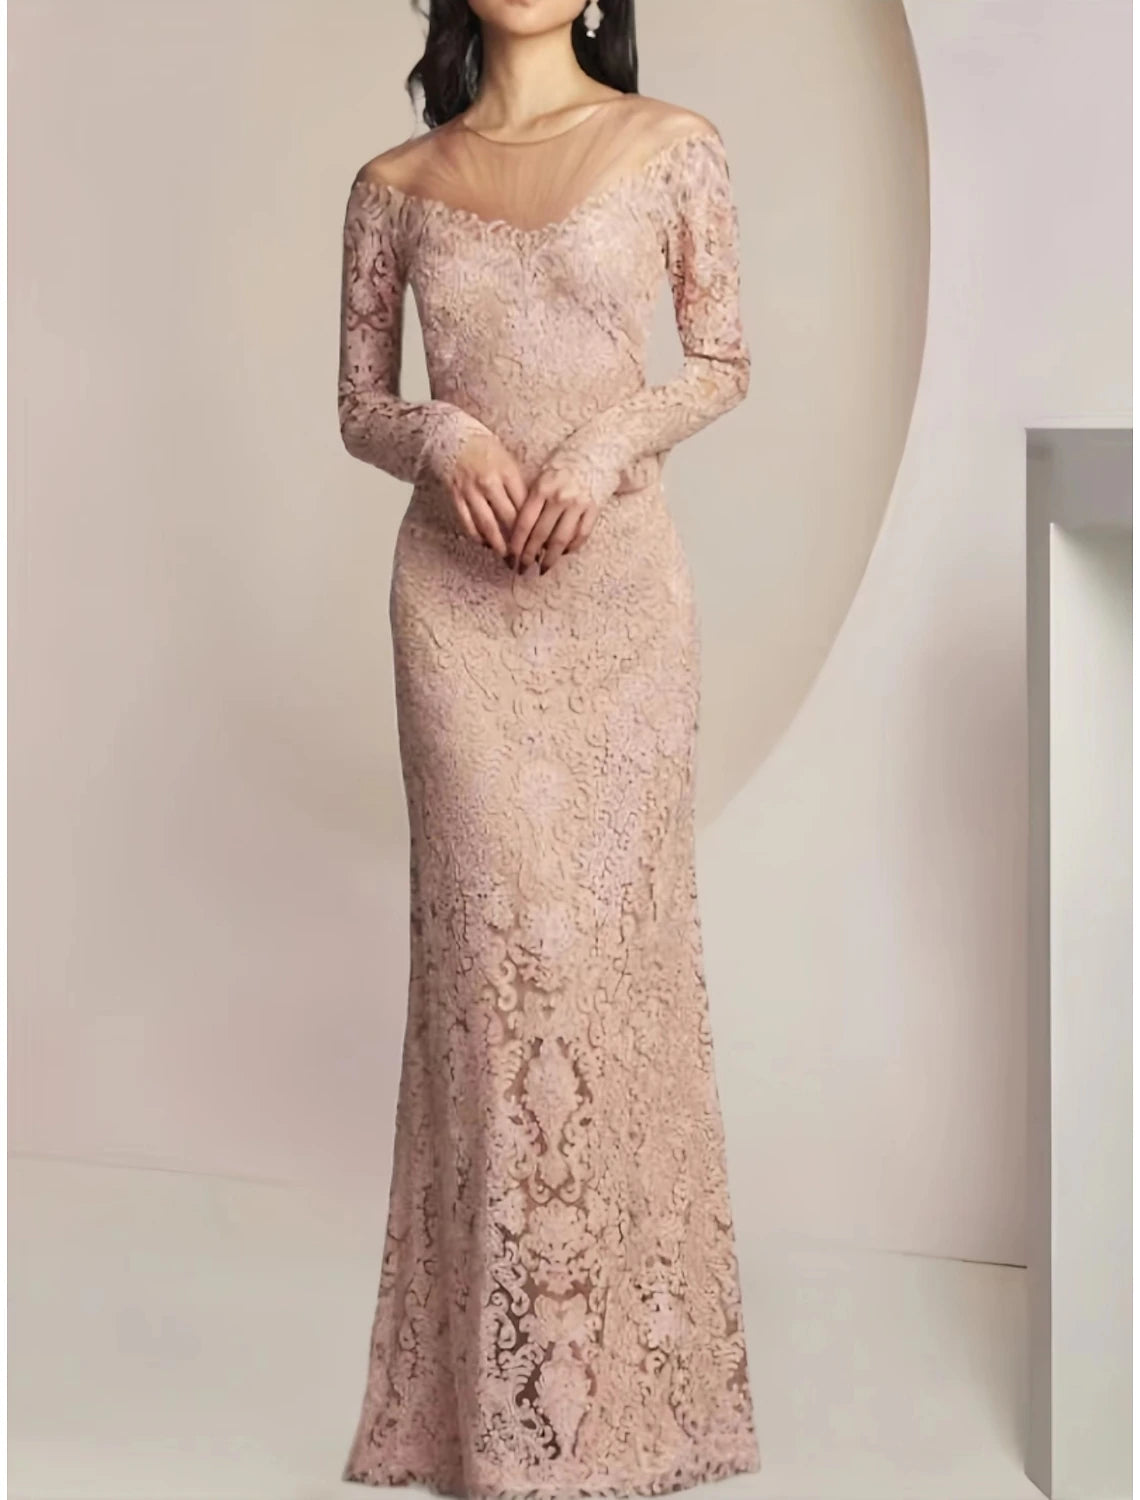 Sheath / Column Mother of the Bride Dress Wedding Guest Elegant Illusion Neck Floor Length Lace Long Sleeve with Solid Color